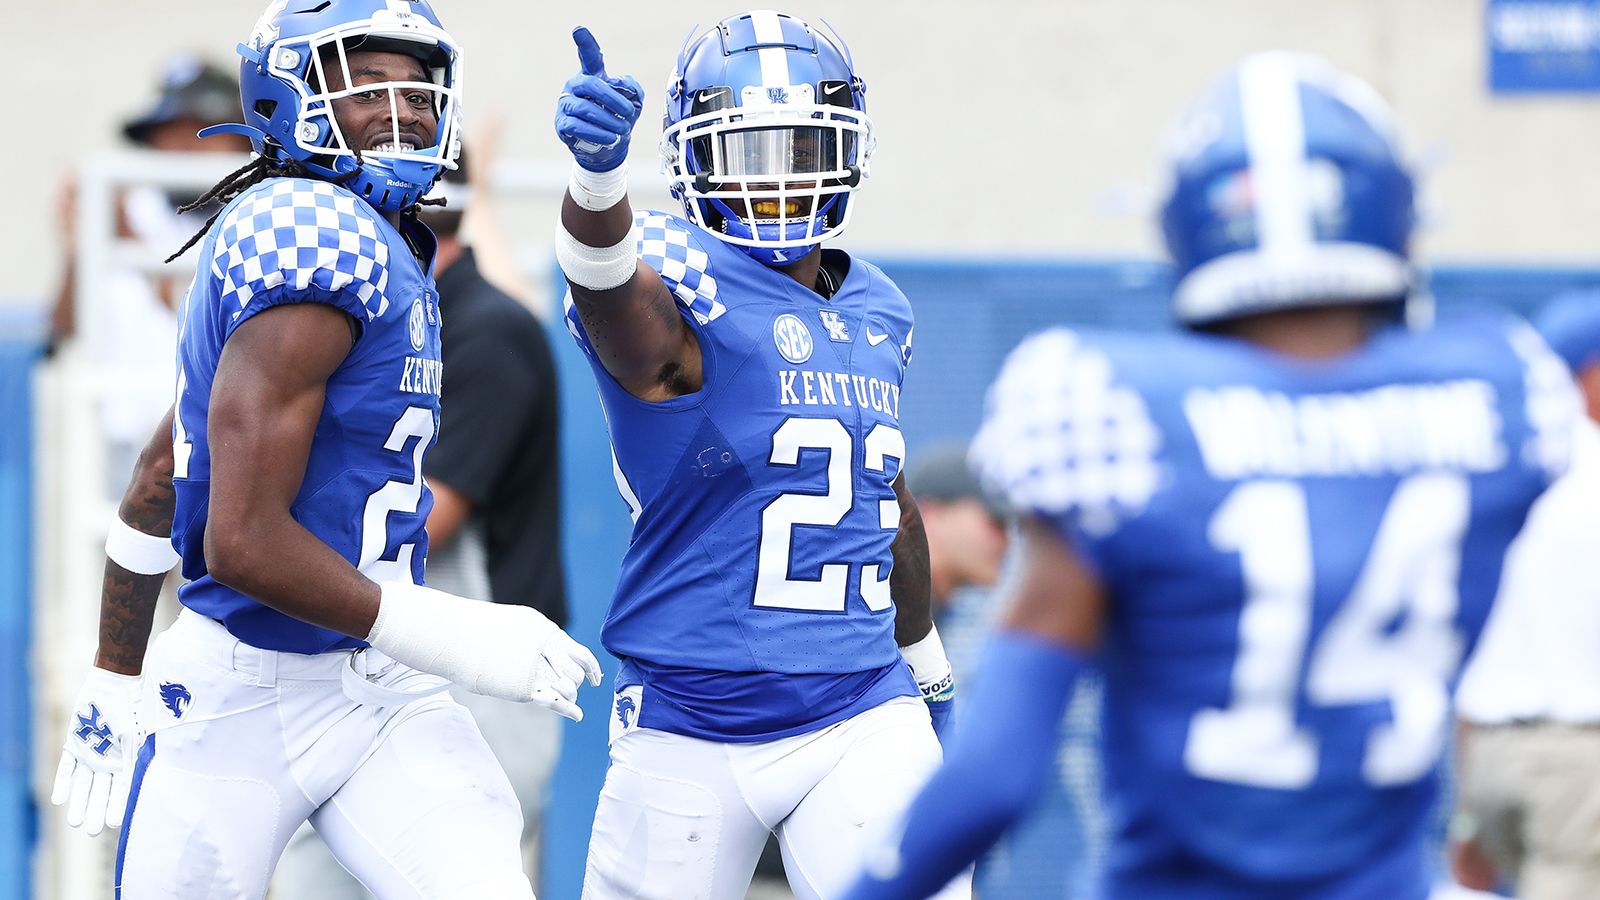 Kentucky Defense Looking to Create More Turnovers